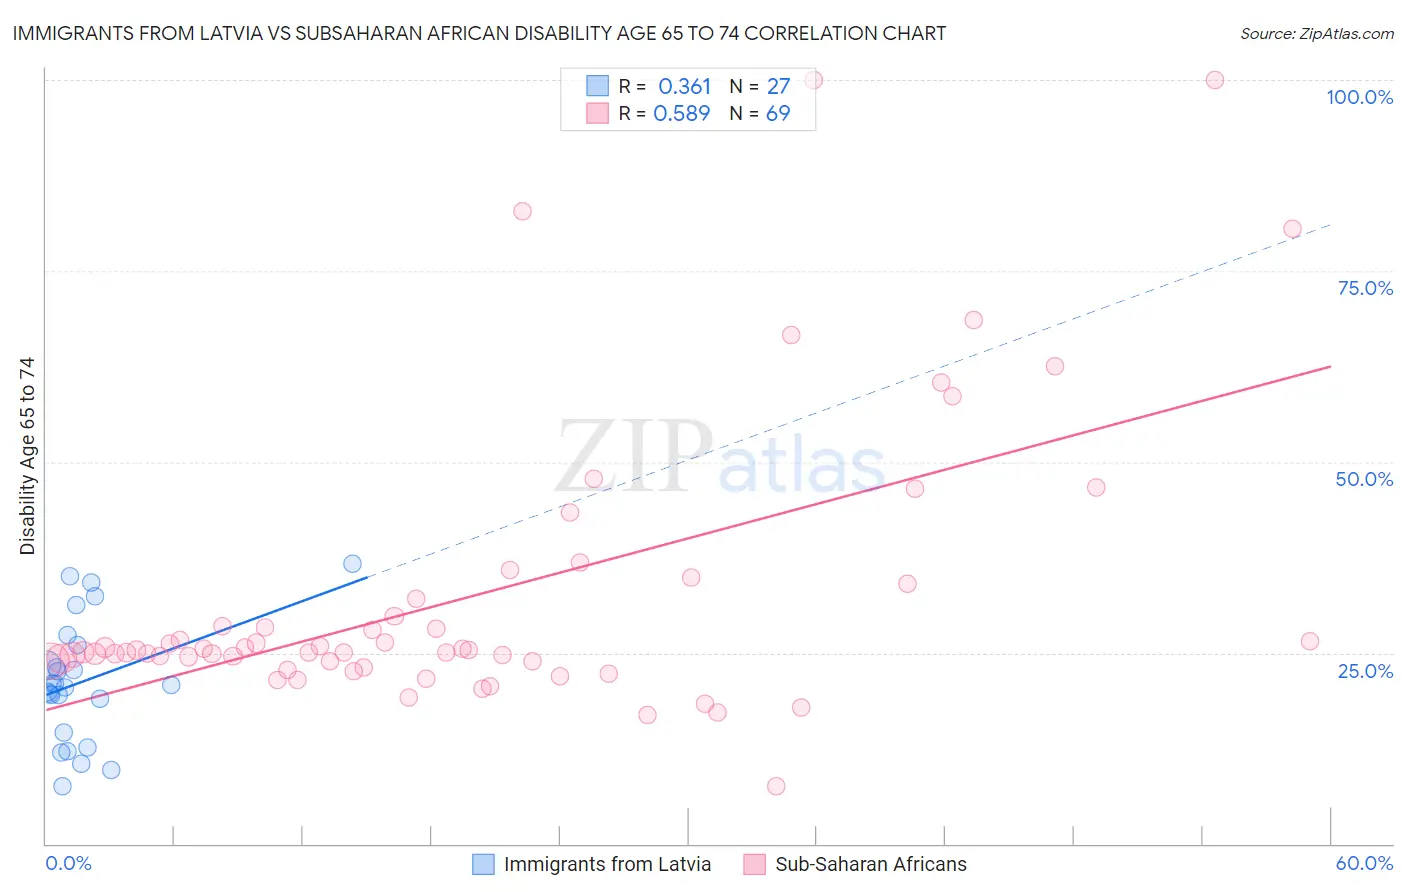 Immigrants from Latvia vs Subsaharan African Disability Age 65 to 74